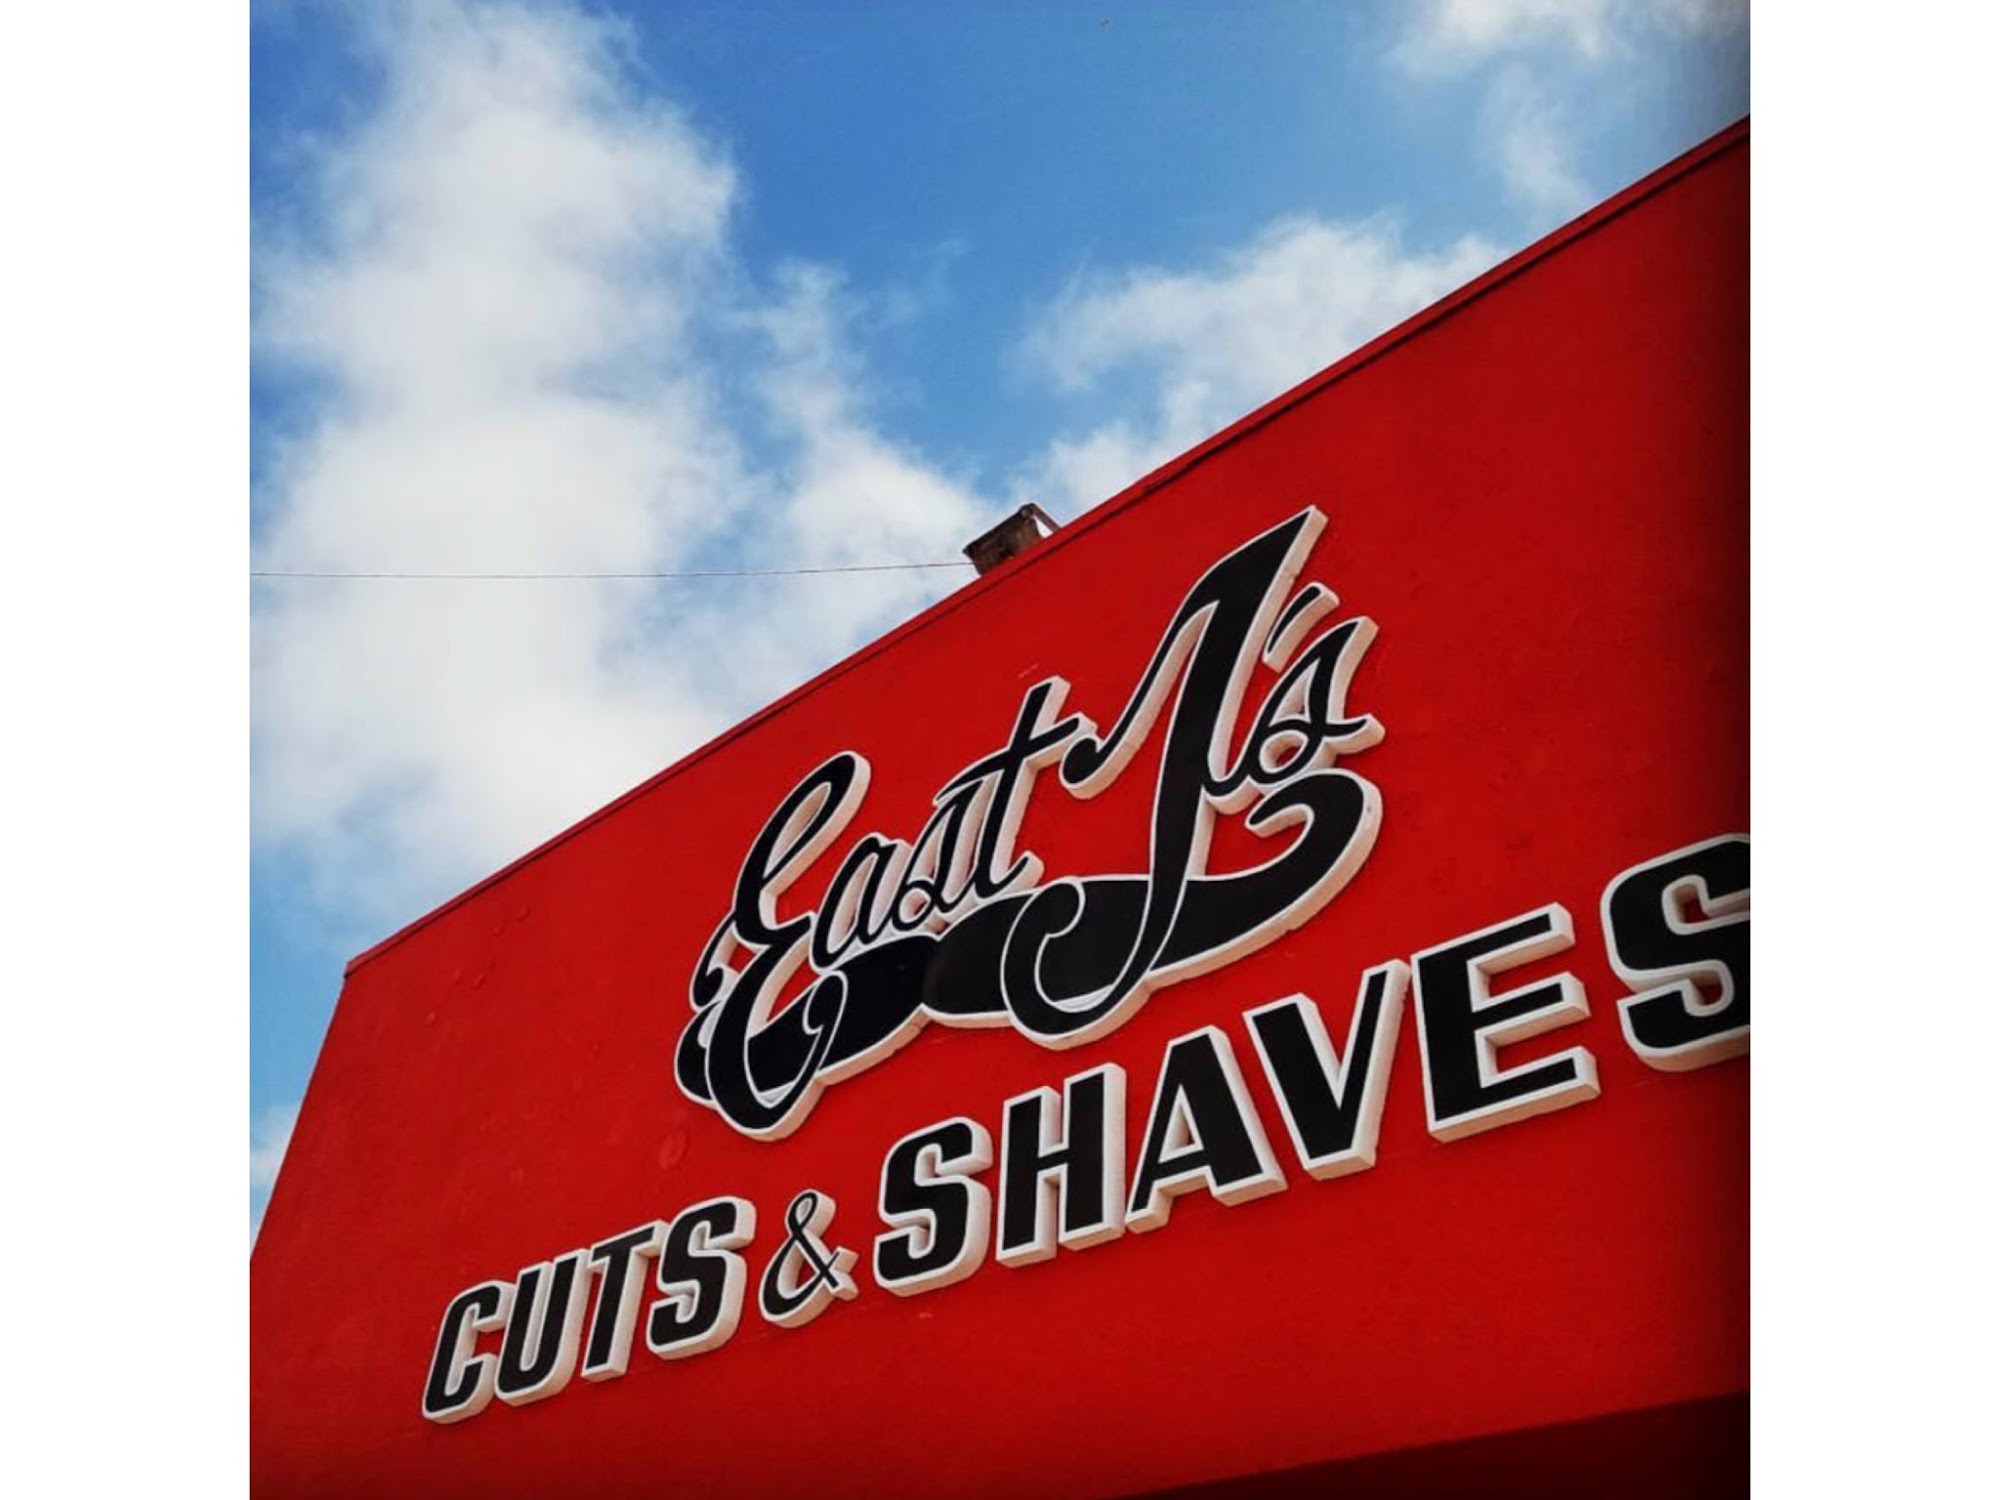 East J's Cuts and Shaves